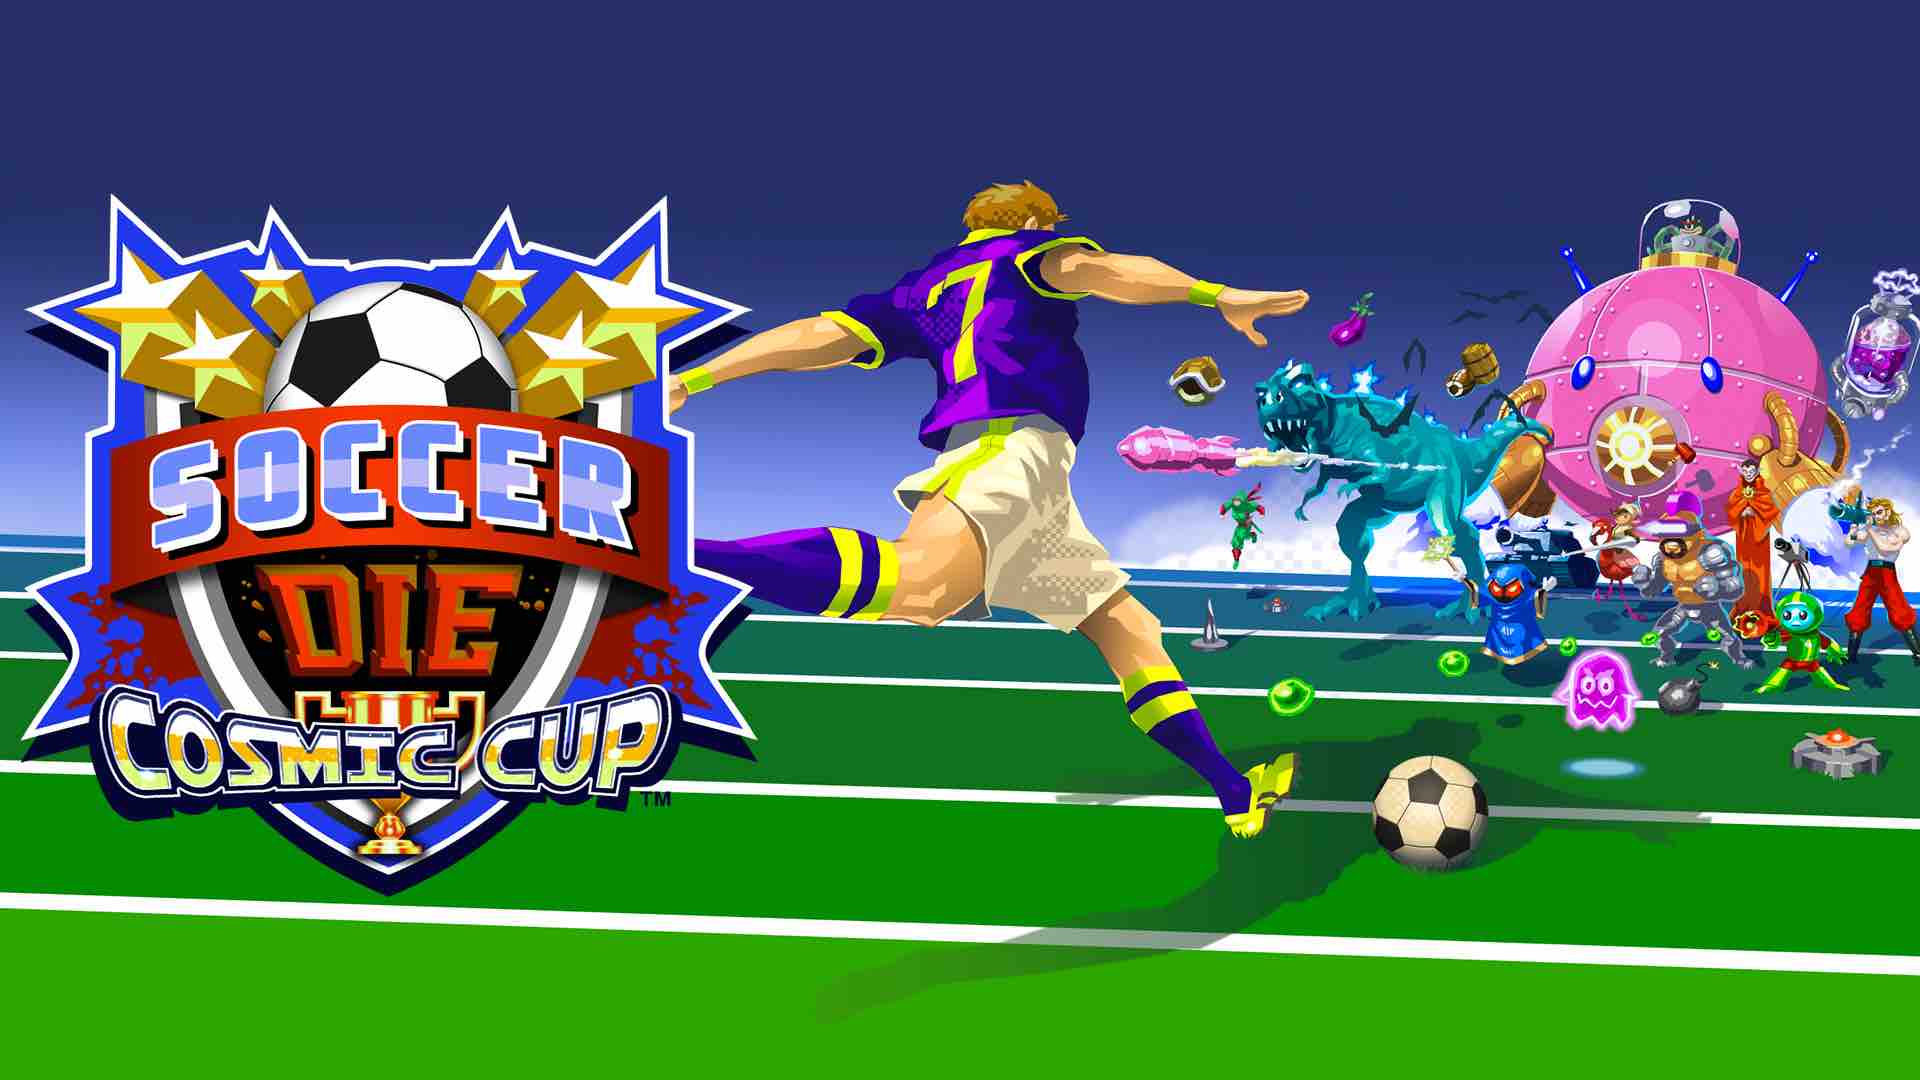 SoccerDie: Cosmic Cup [Switch] Review – Own Goal